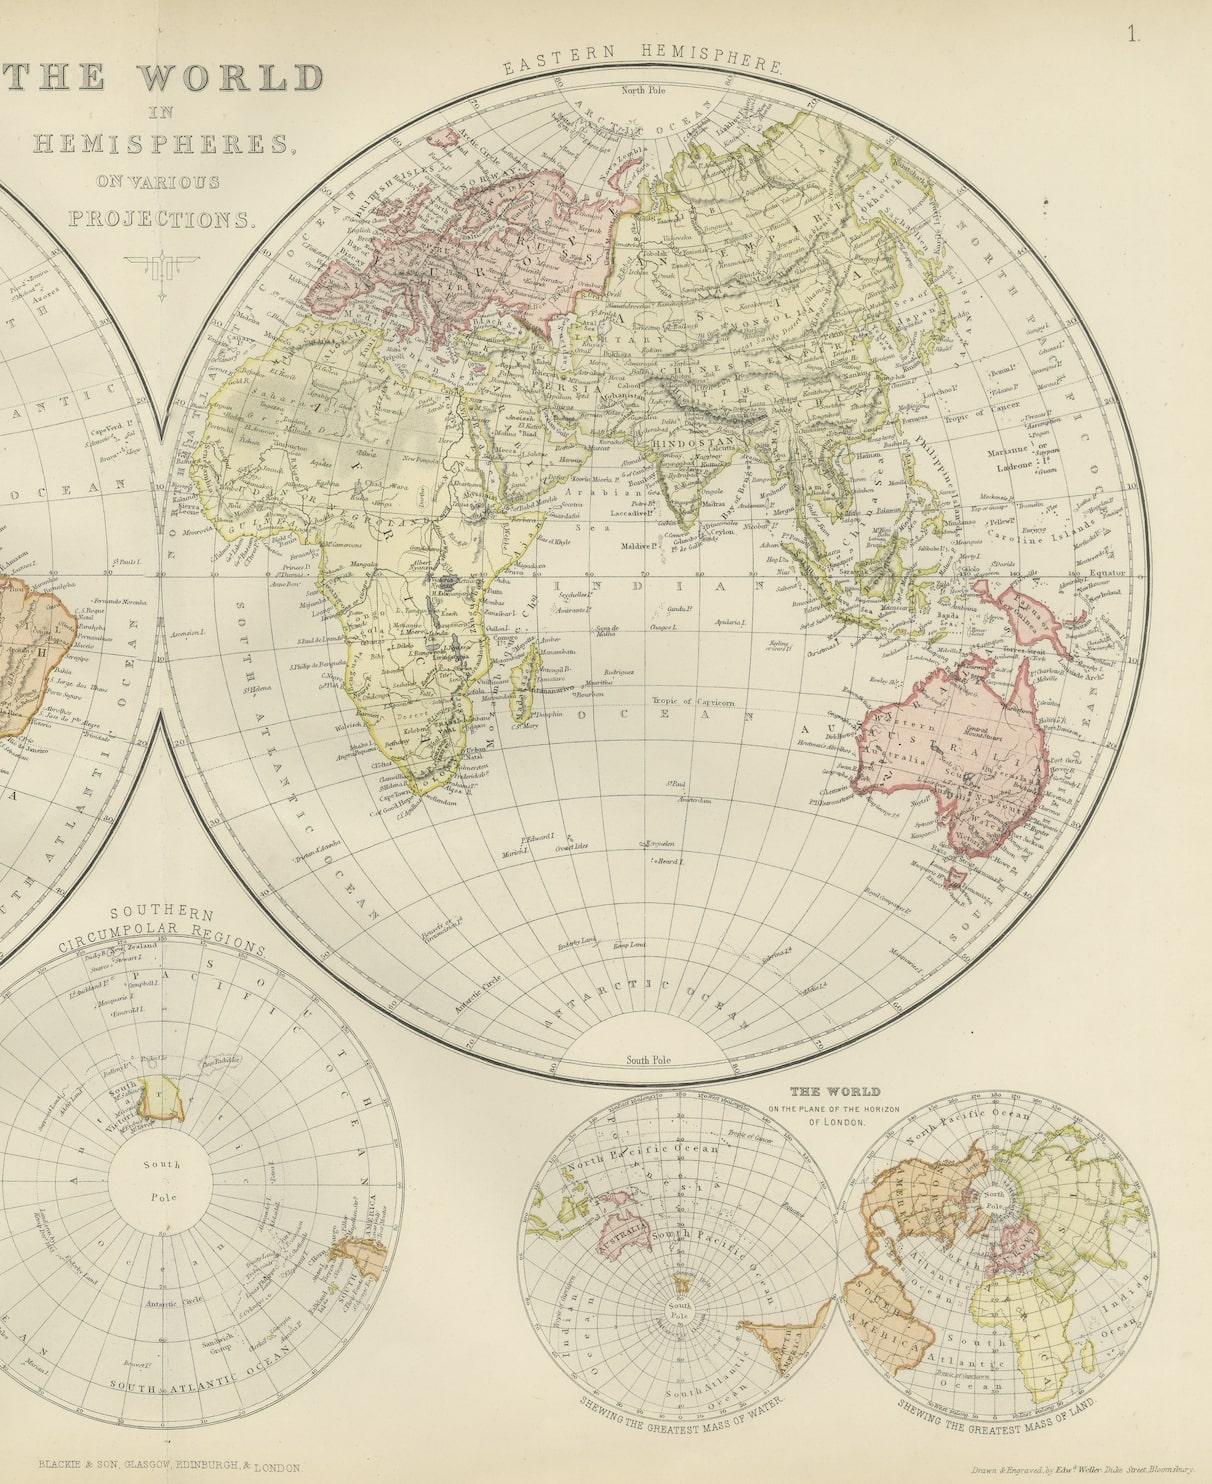 This stunning 1882 'Antique Map of The World in Hemispheres' showcases an exquisite blend of cartographic precision and artistic elegance. Crafted under the watchful eye of W.G. Blackie, it's a testament to the era's meticulous mapmaking.

The map's